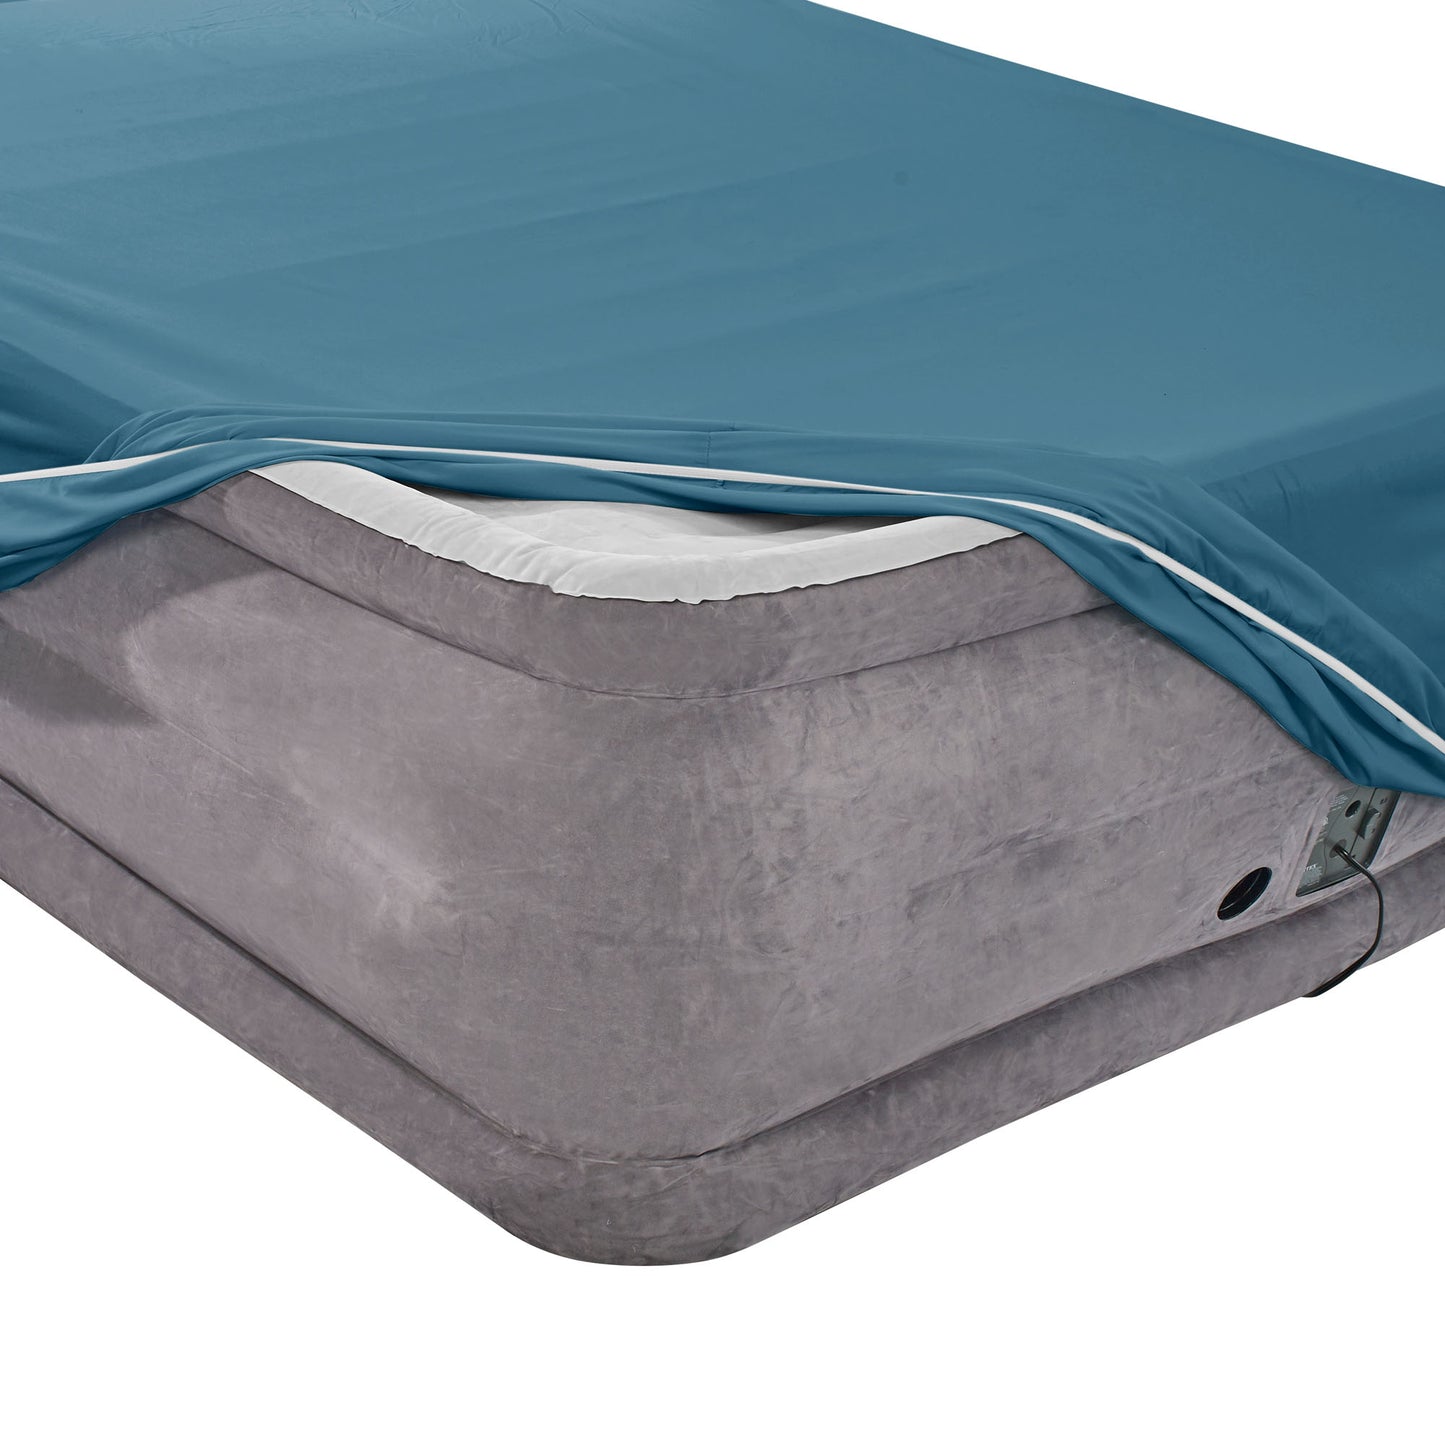 Nestl Bedding Twin Fitted Sheet - Single Fitted Deep Pocket Sheet - Fits Mattress Perfectly - Soft Wrinkle Free Sheet - 1 Fitted Sheet Only